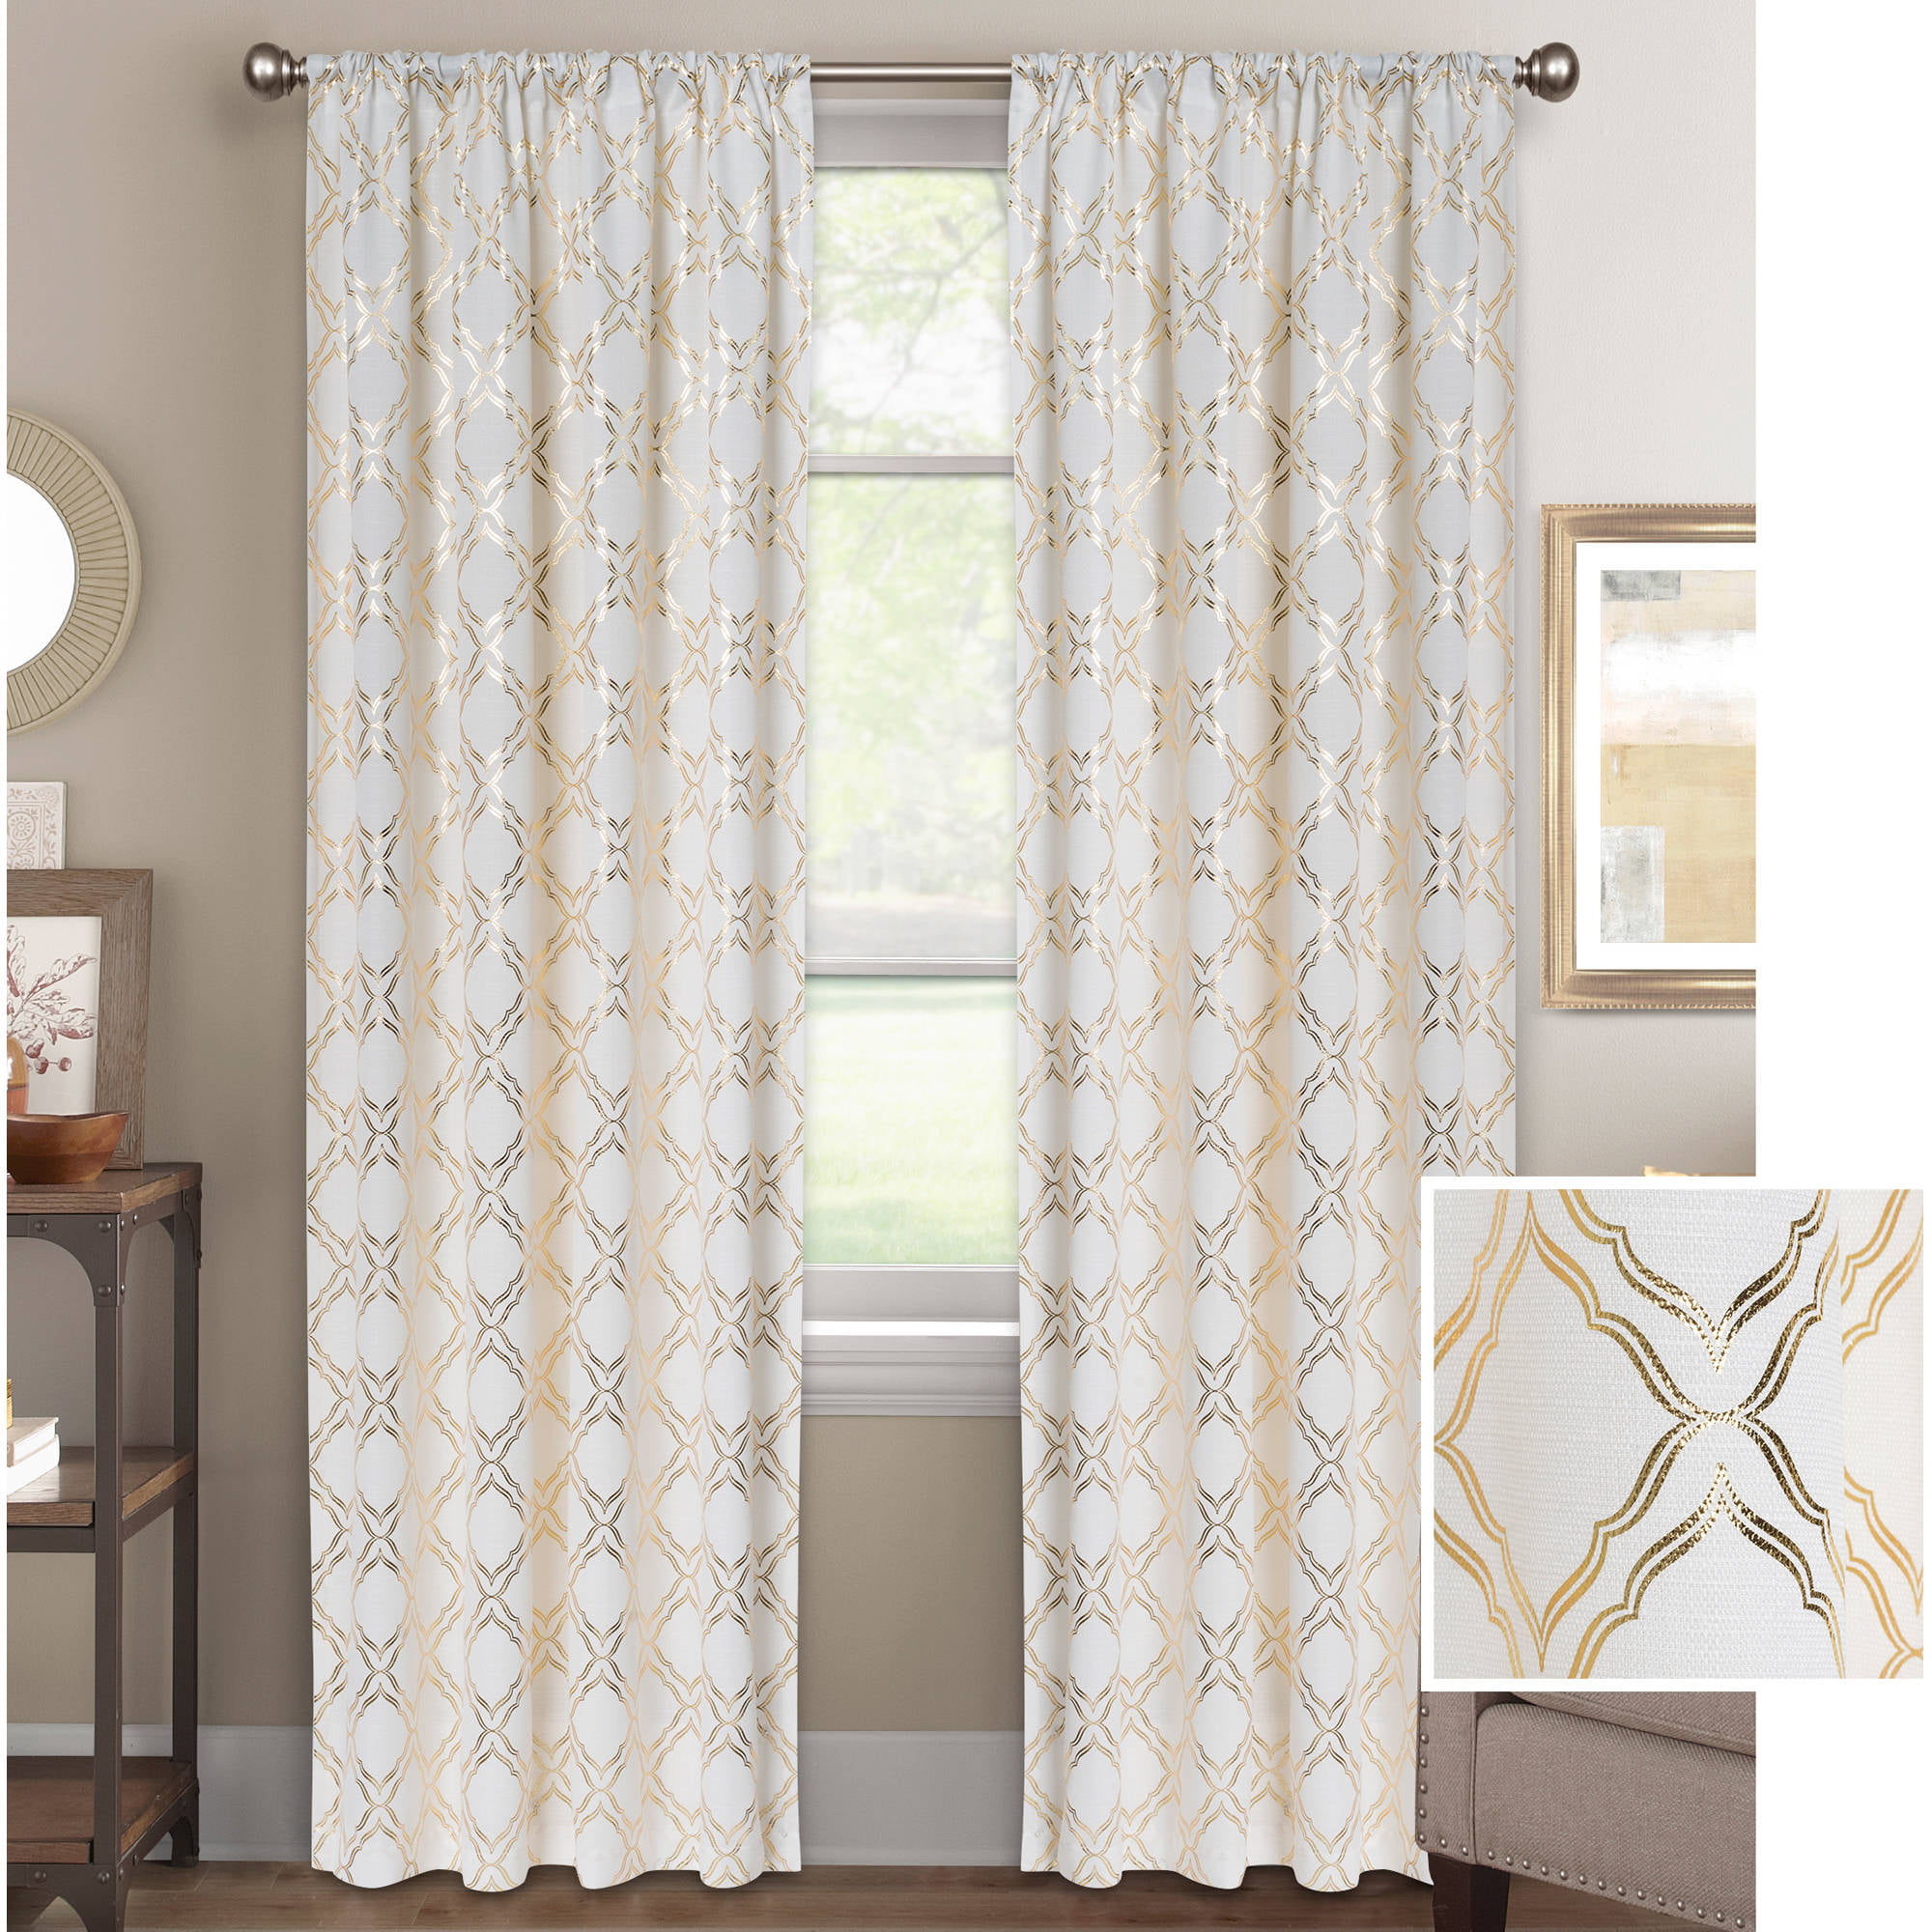 YJ YANJUN White Sheer Curtains 84 inches Long Trellis Gold Foil Curtains for Living Room Bedroom Set of 2 Panles 52 x 84 inch 